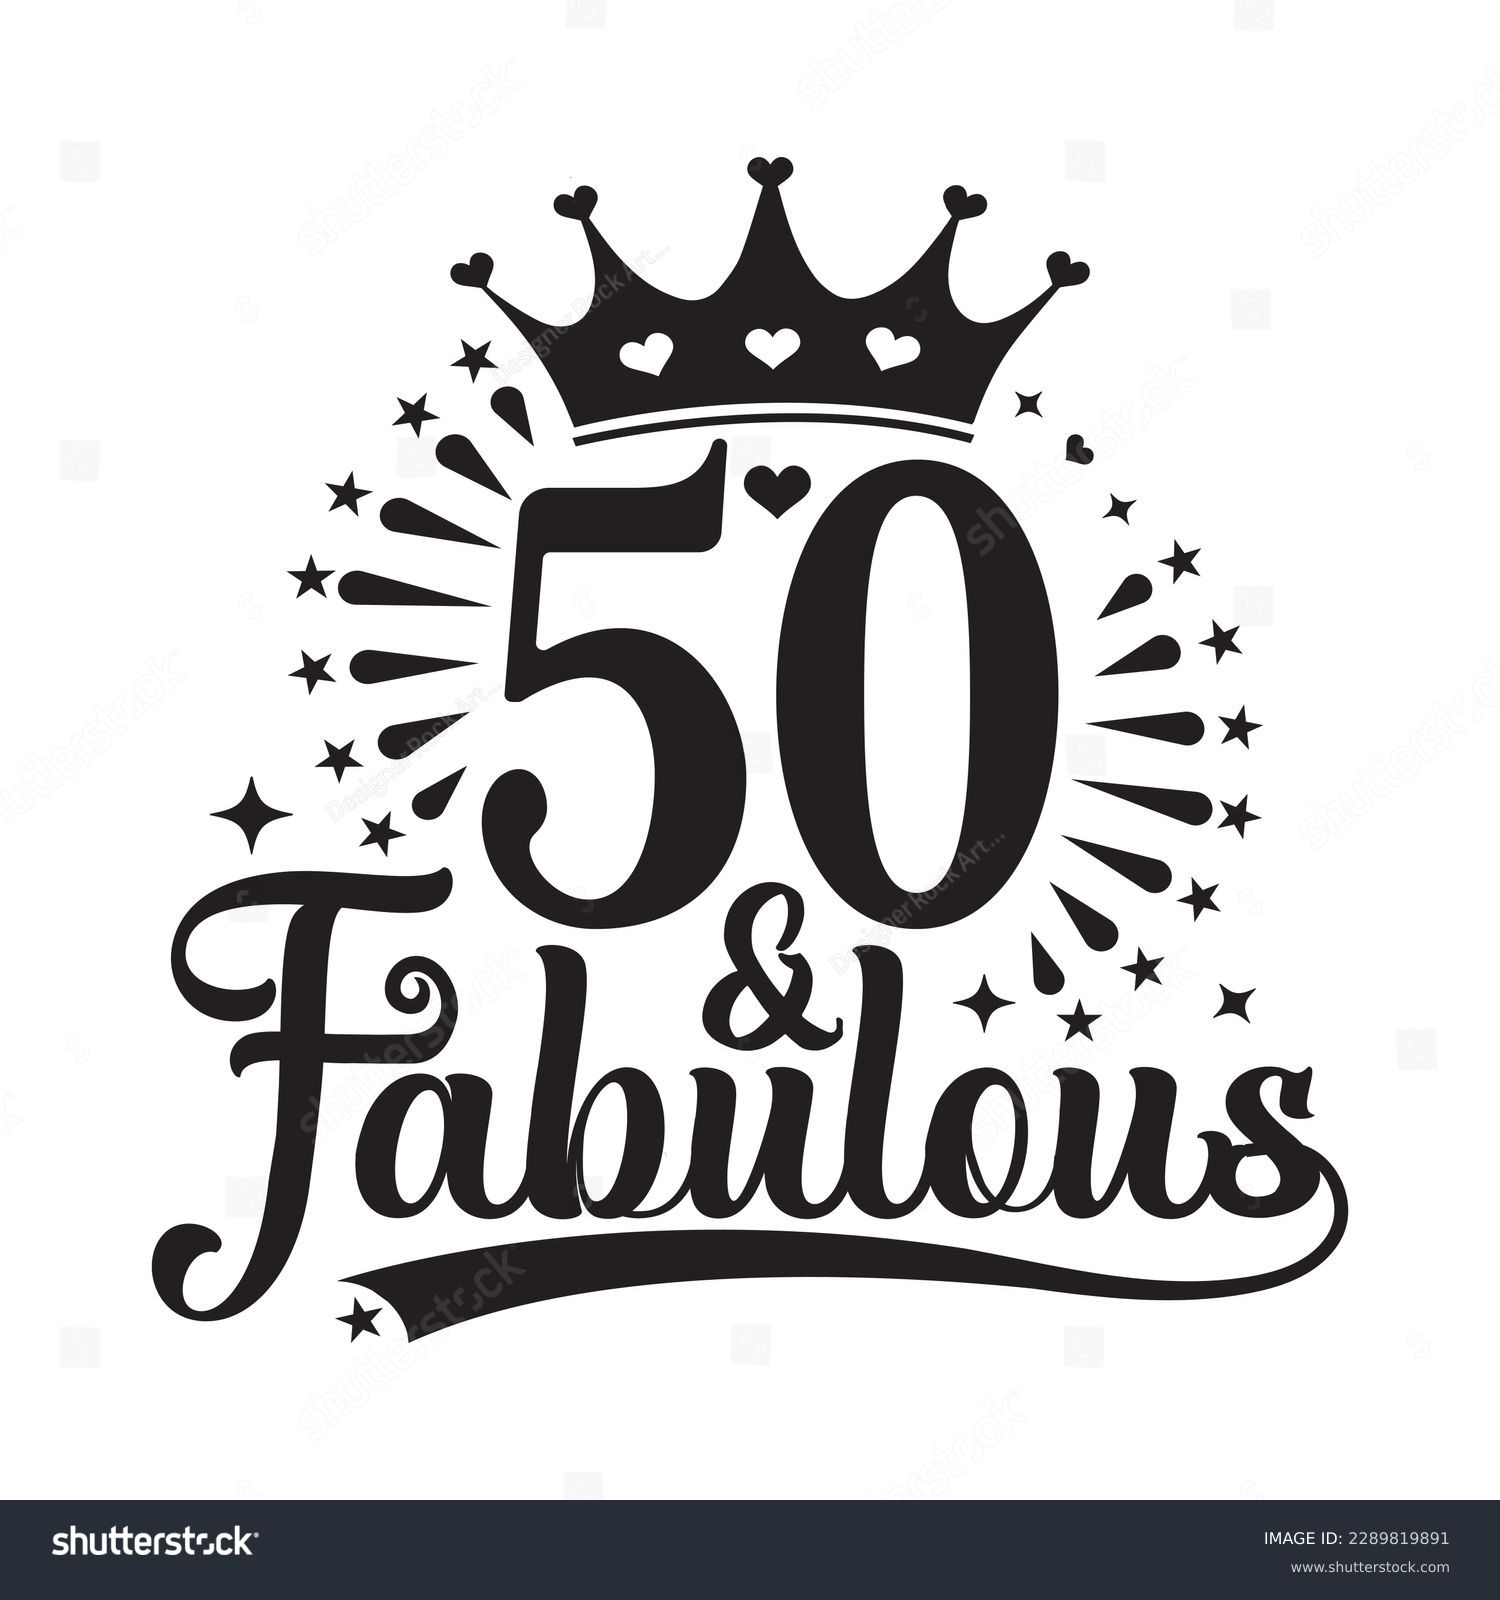 SVG of 50 and Fabulous , fifty Birthday, typography lettering design with inspirational quotes svg